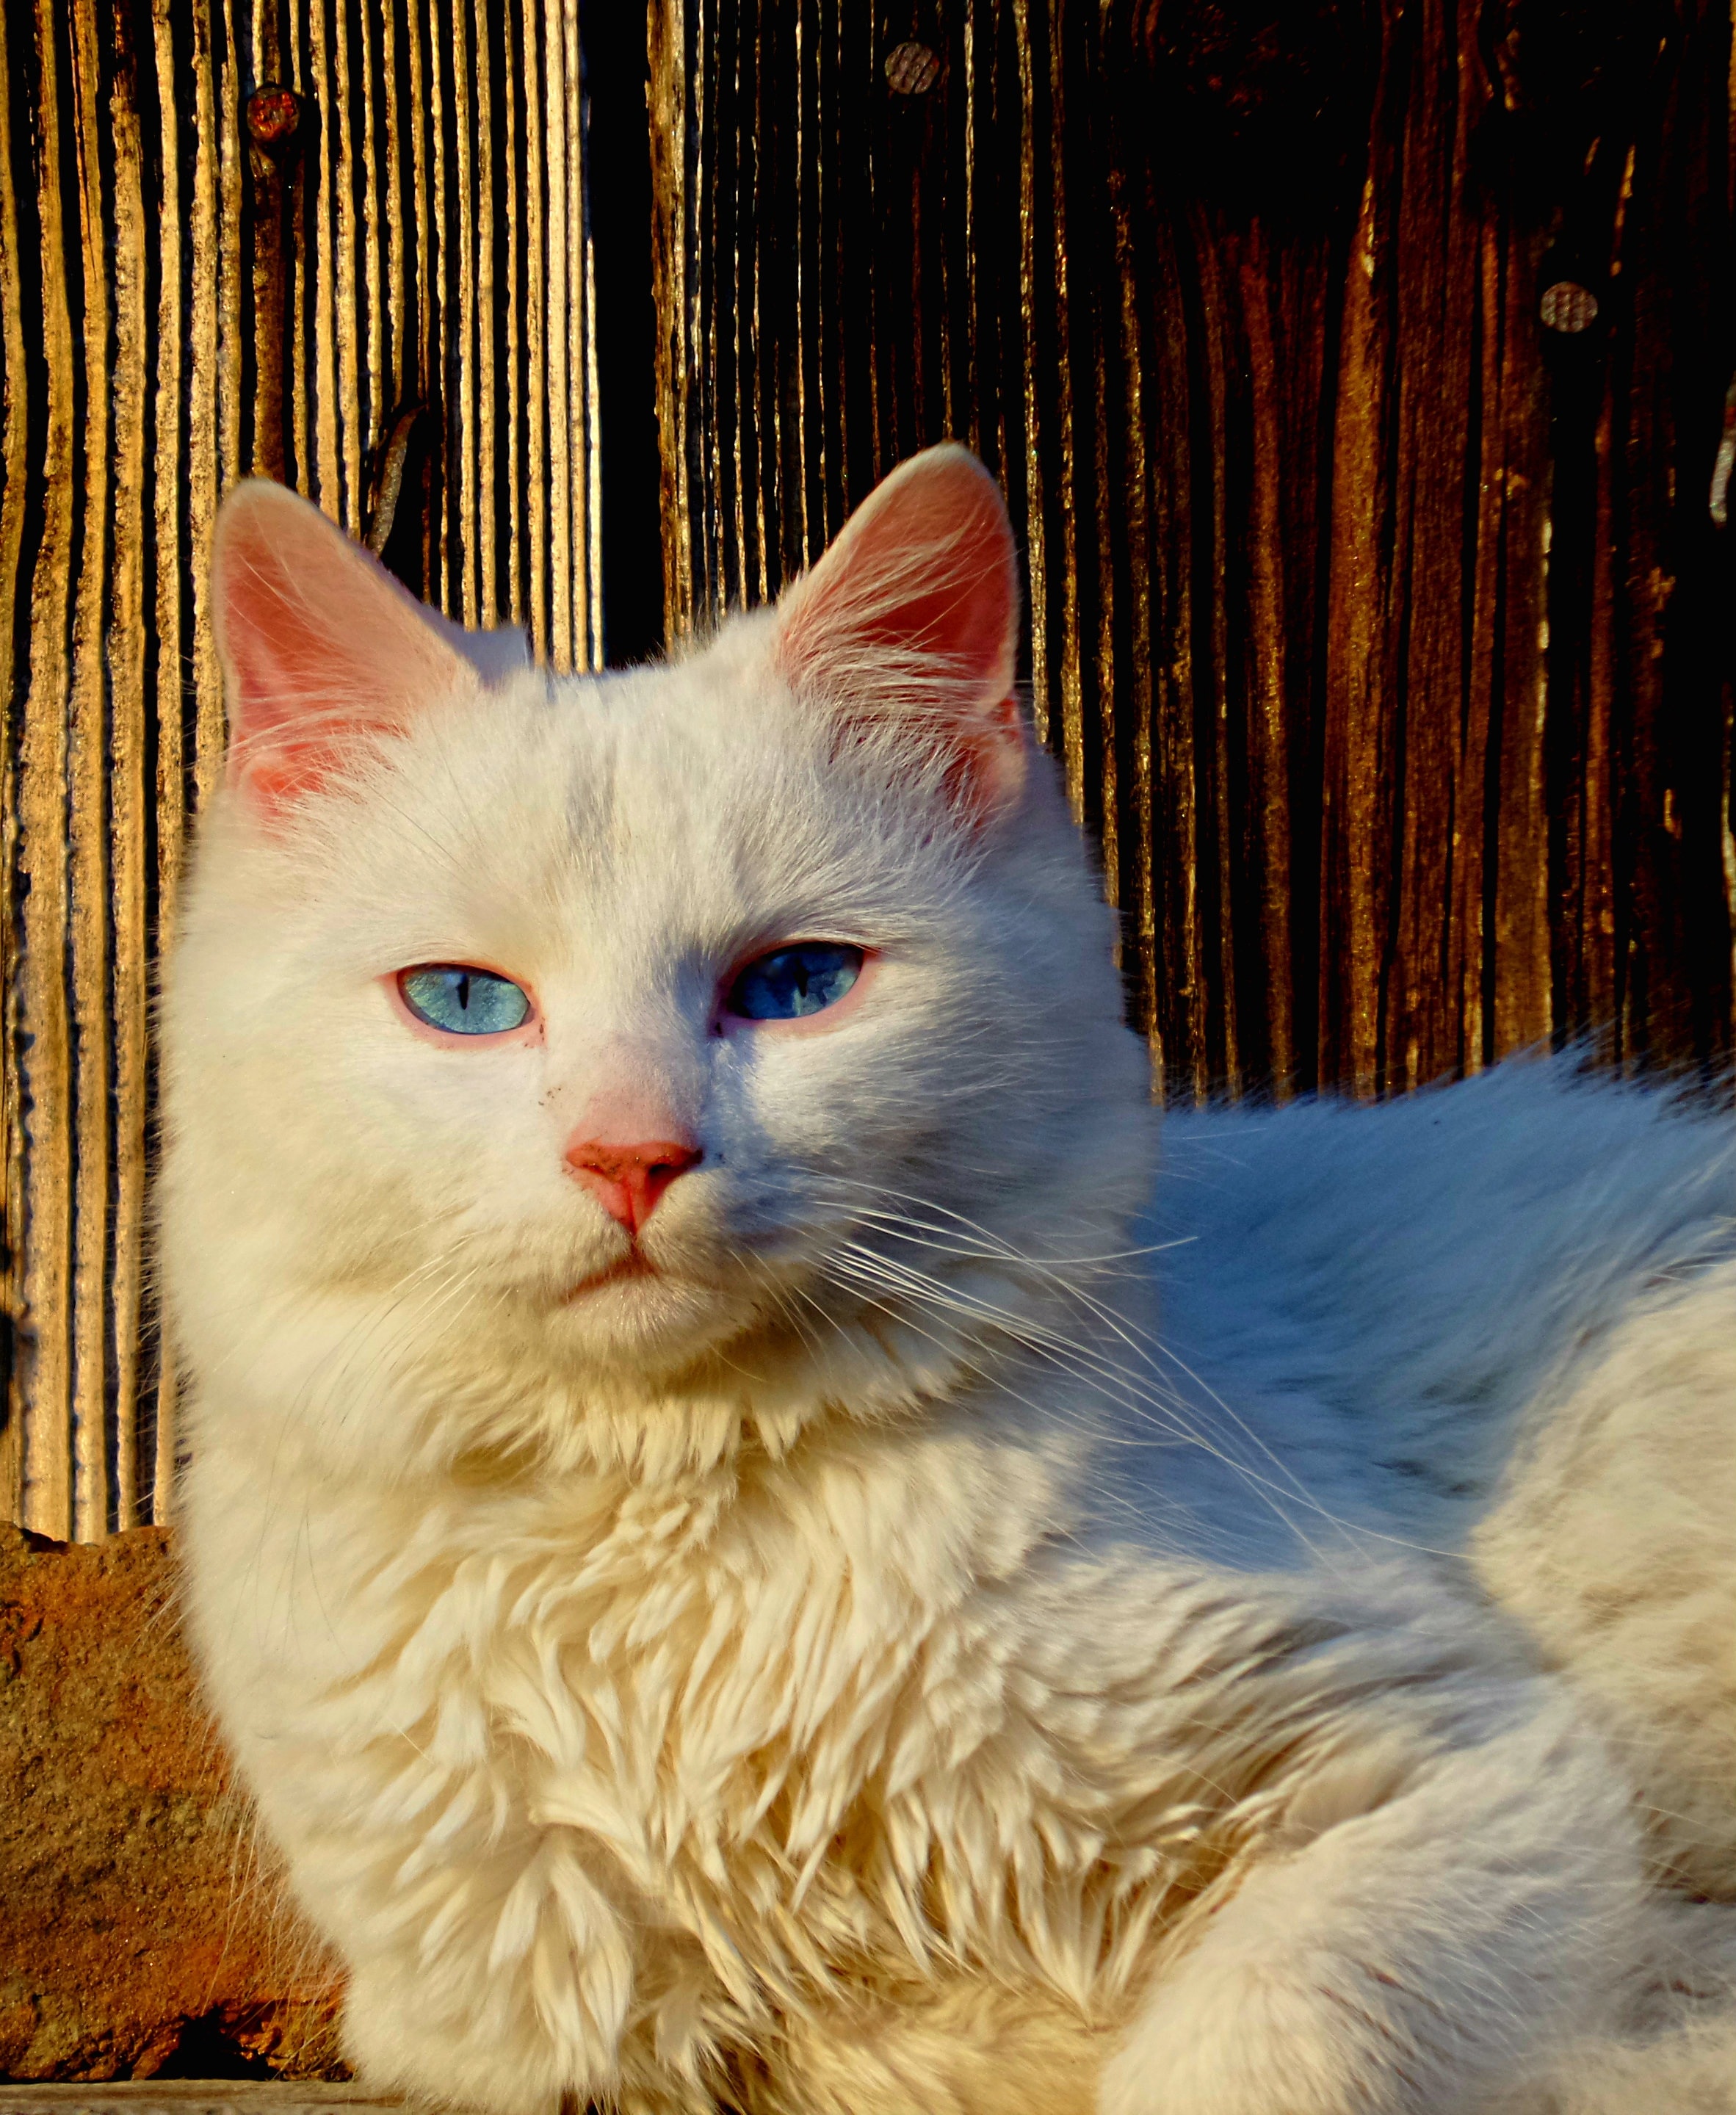 At The Same Time, Cat, White, domestic cat, pets